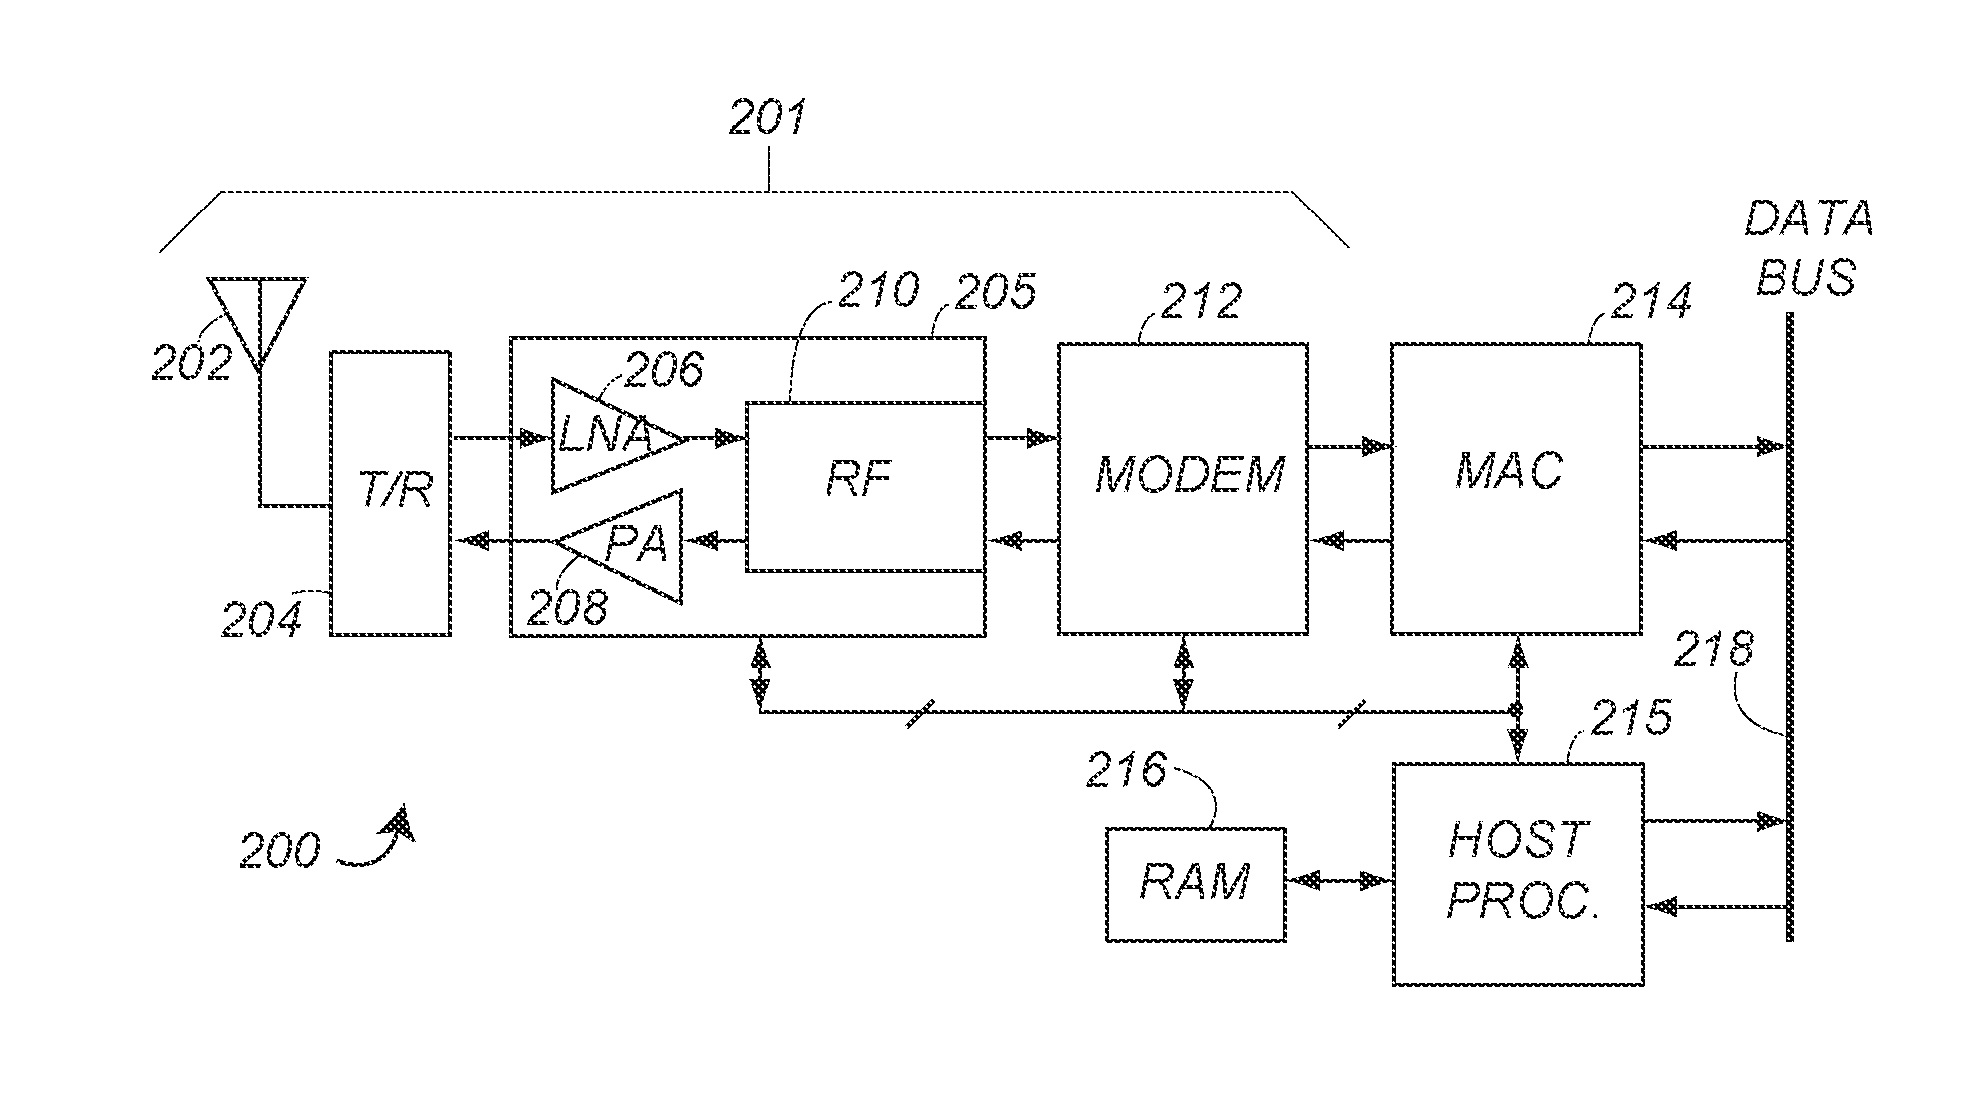 Automatic gain control and low power start-of-packet detection for a wireless LAN receiver